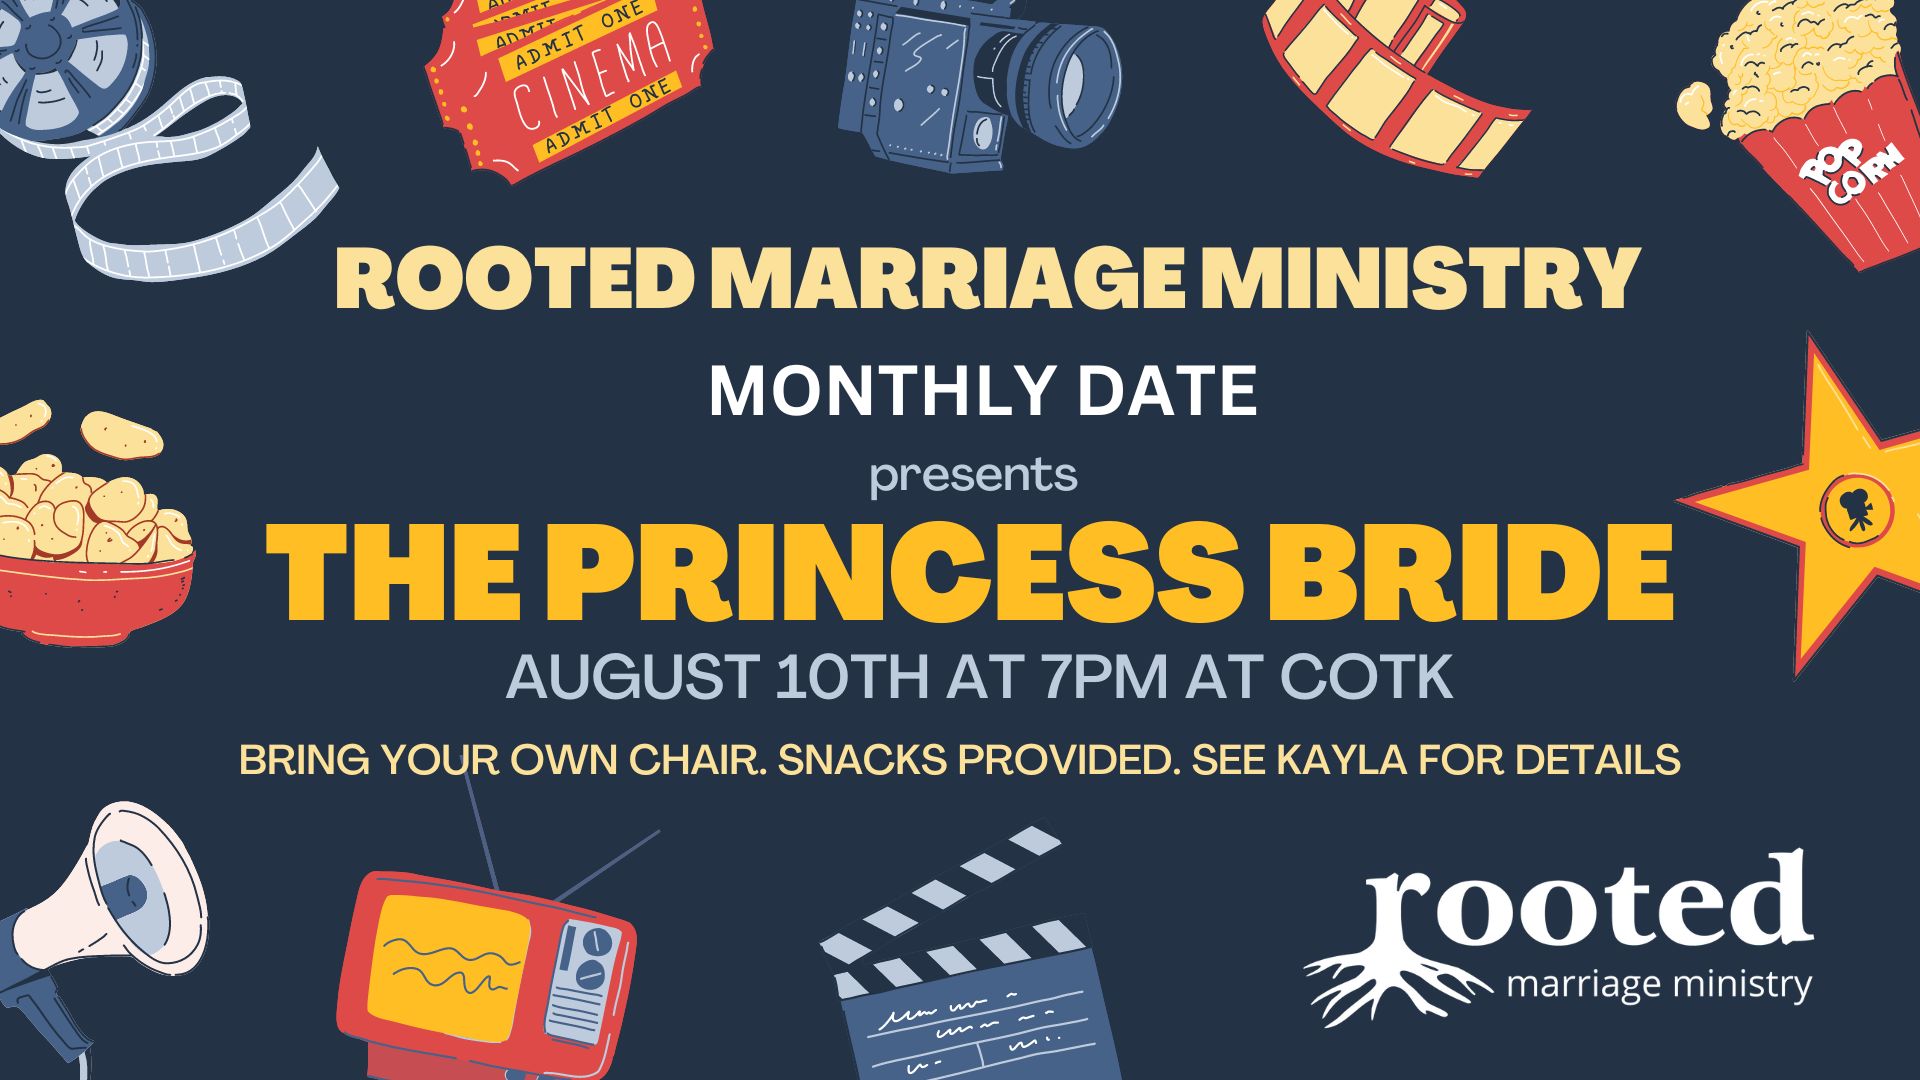 ROOTED MARRIAGE MINISTRY DATES